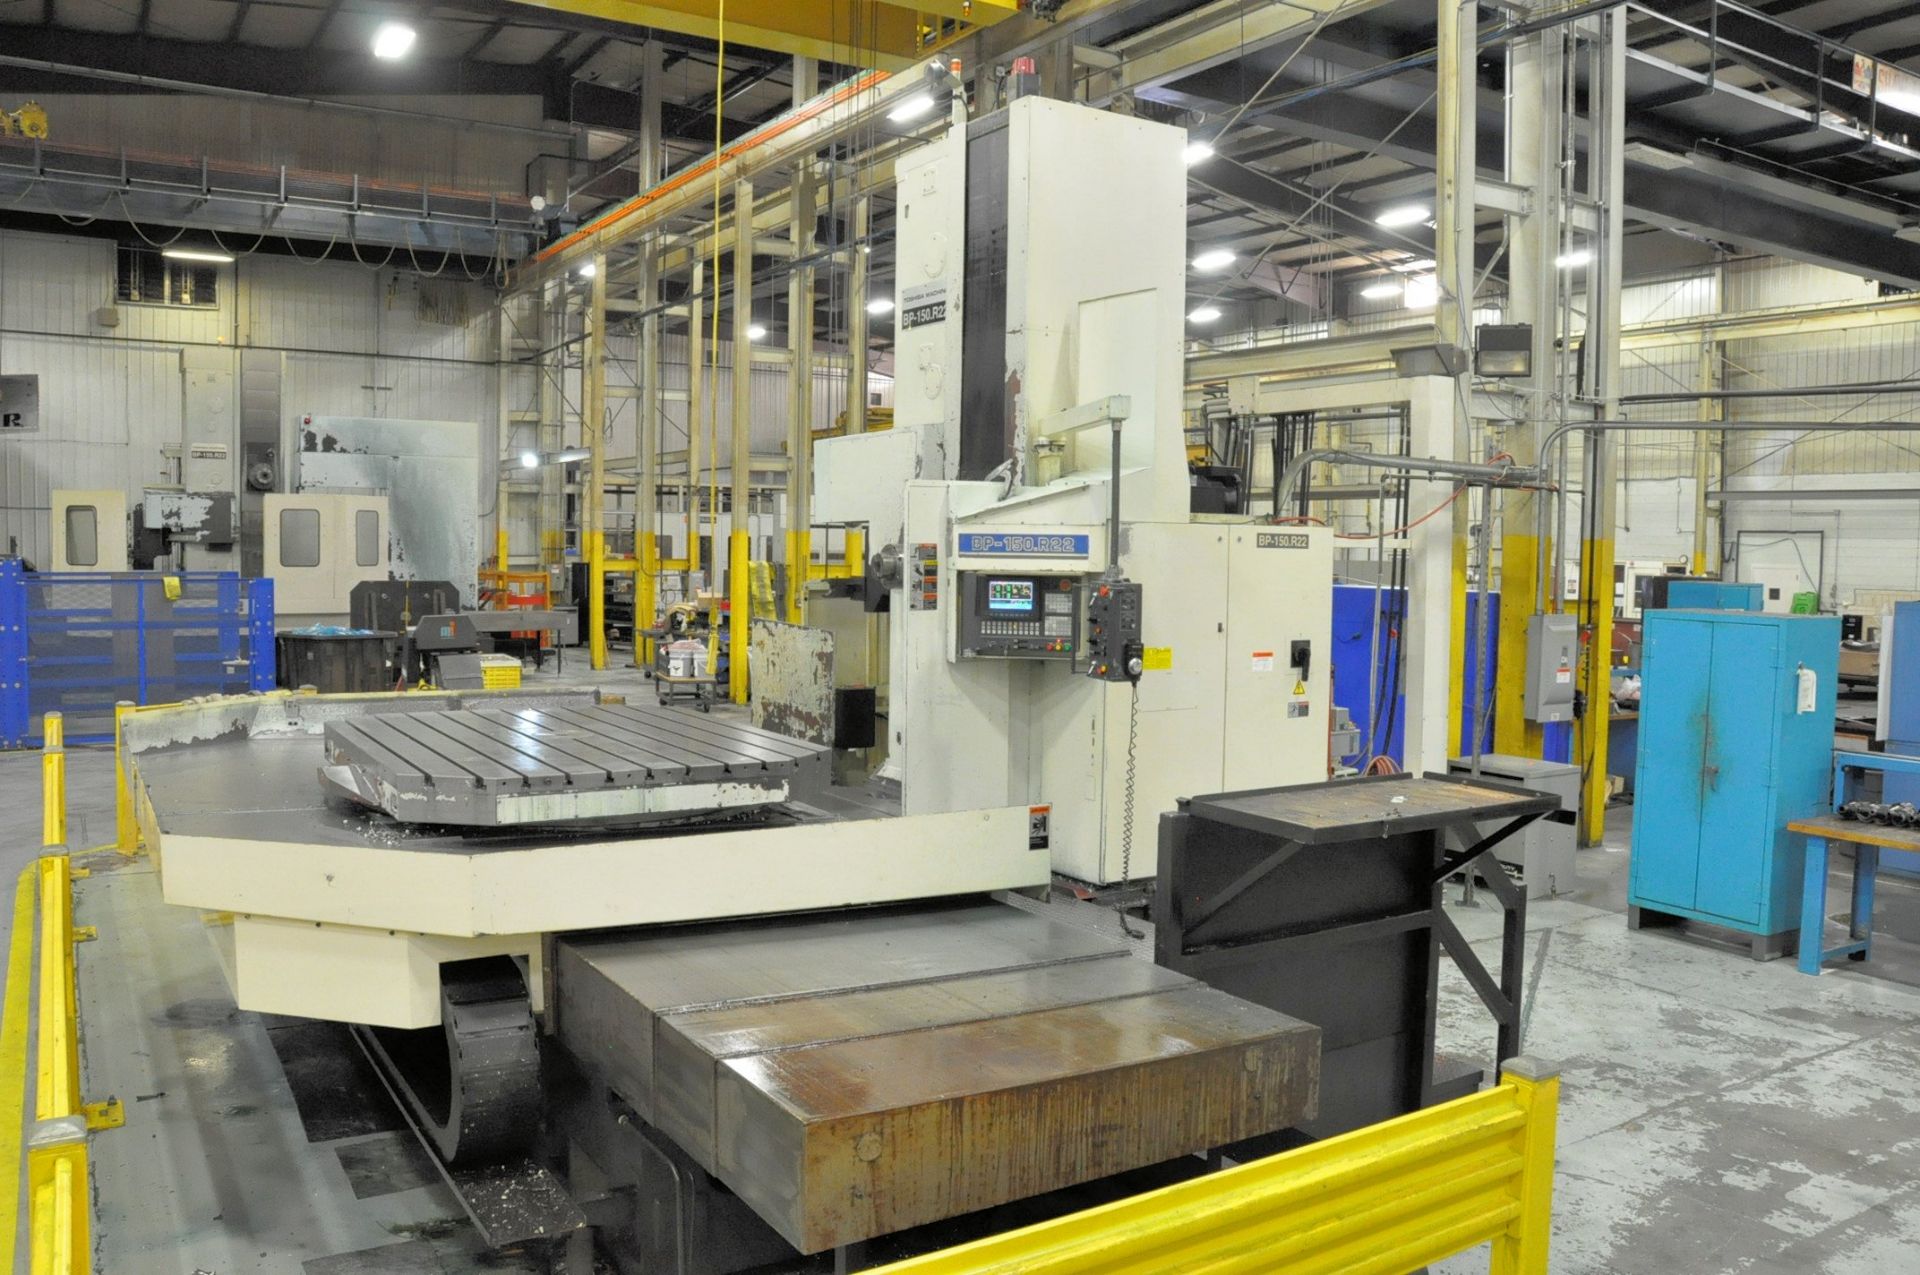 TOSHIBA BP150.R22 CNC Table Type Horizontal Boring Mill (New 2008), 5.9'' Spindle, X-160'', Y-100'', - Image 2 of 18